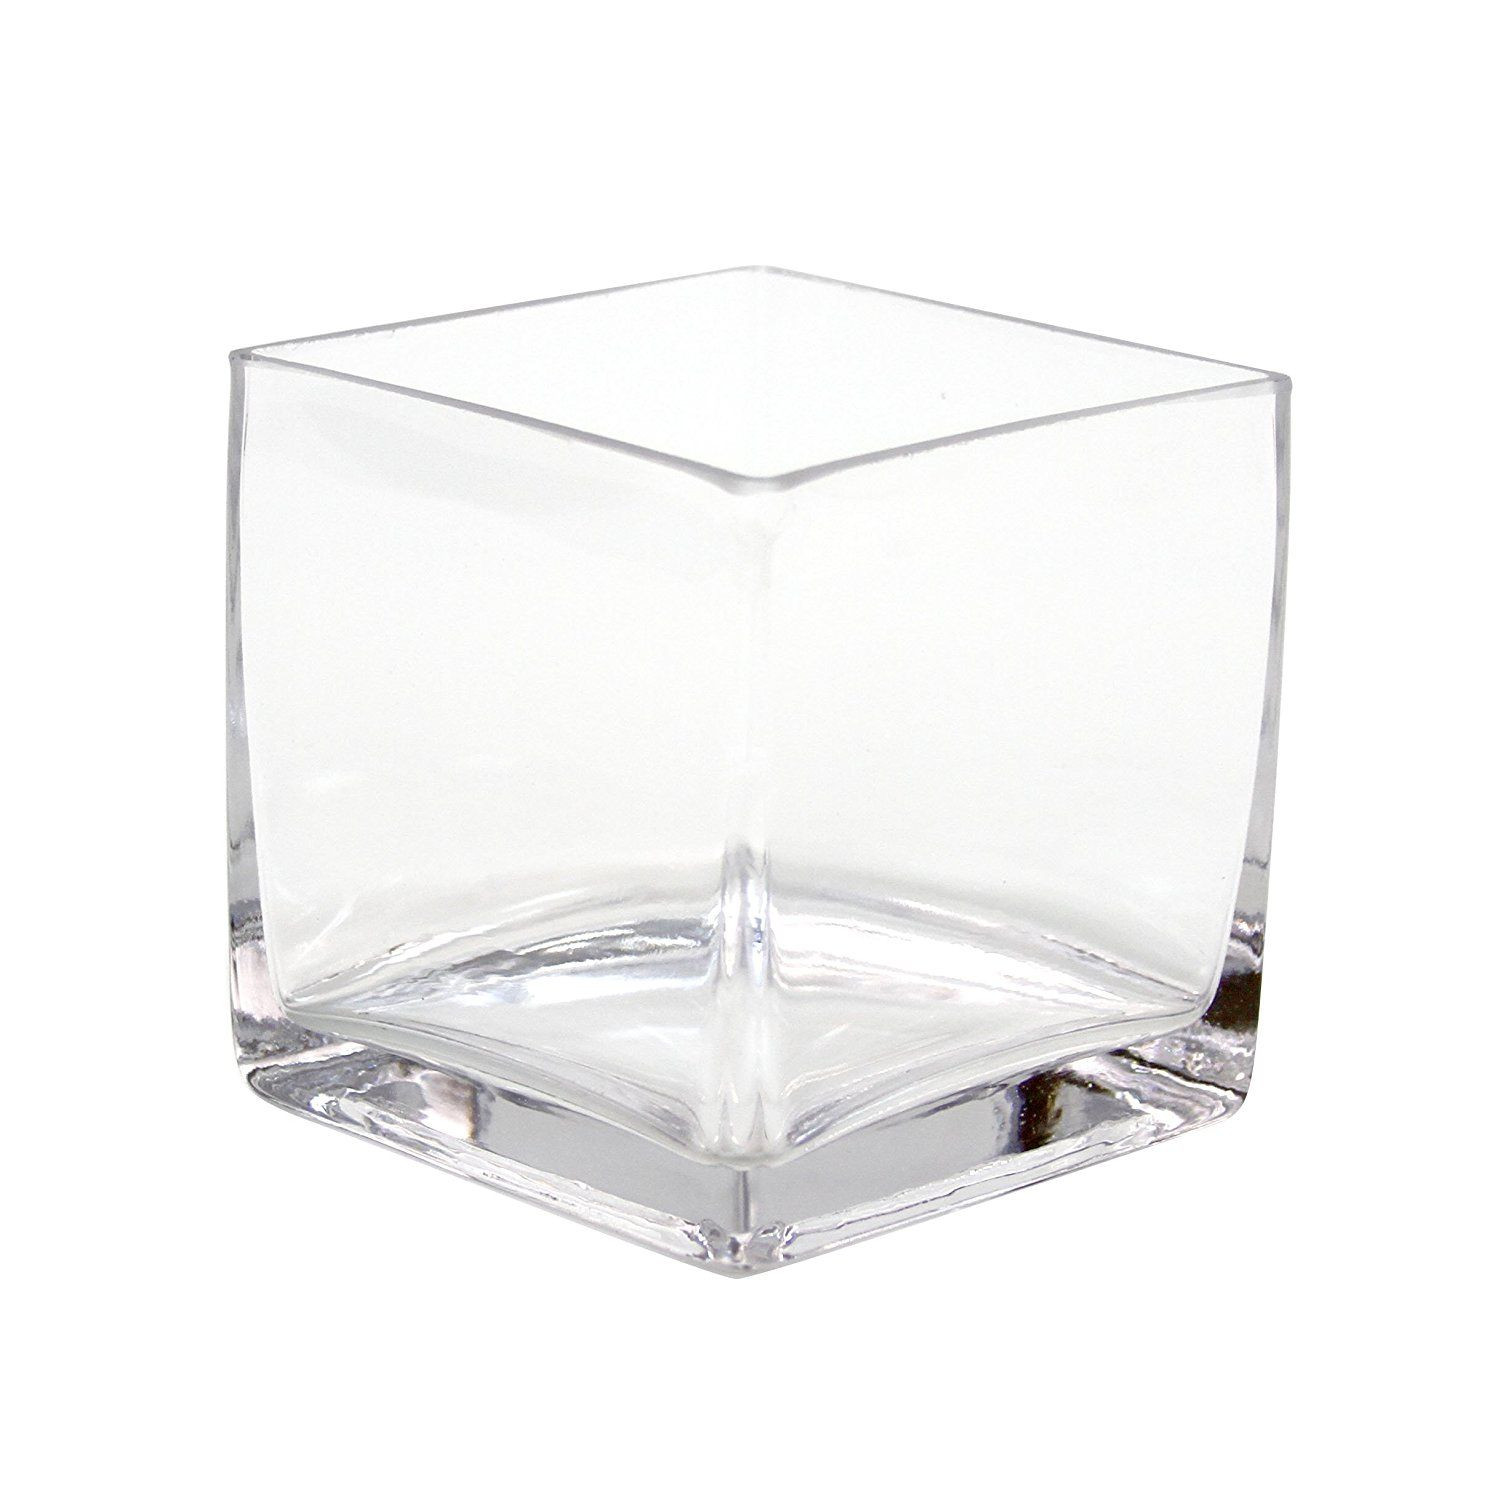 25 Stylish wholesale event Vases 2024 free download wholesale event vases of koyal wholesale 404343 12 pack cube square glass vases 4 by 4 by 4 intended for koyal wholesale 404343 12 pack cube square glass vases 4 by 4 by 4